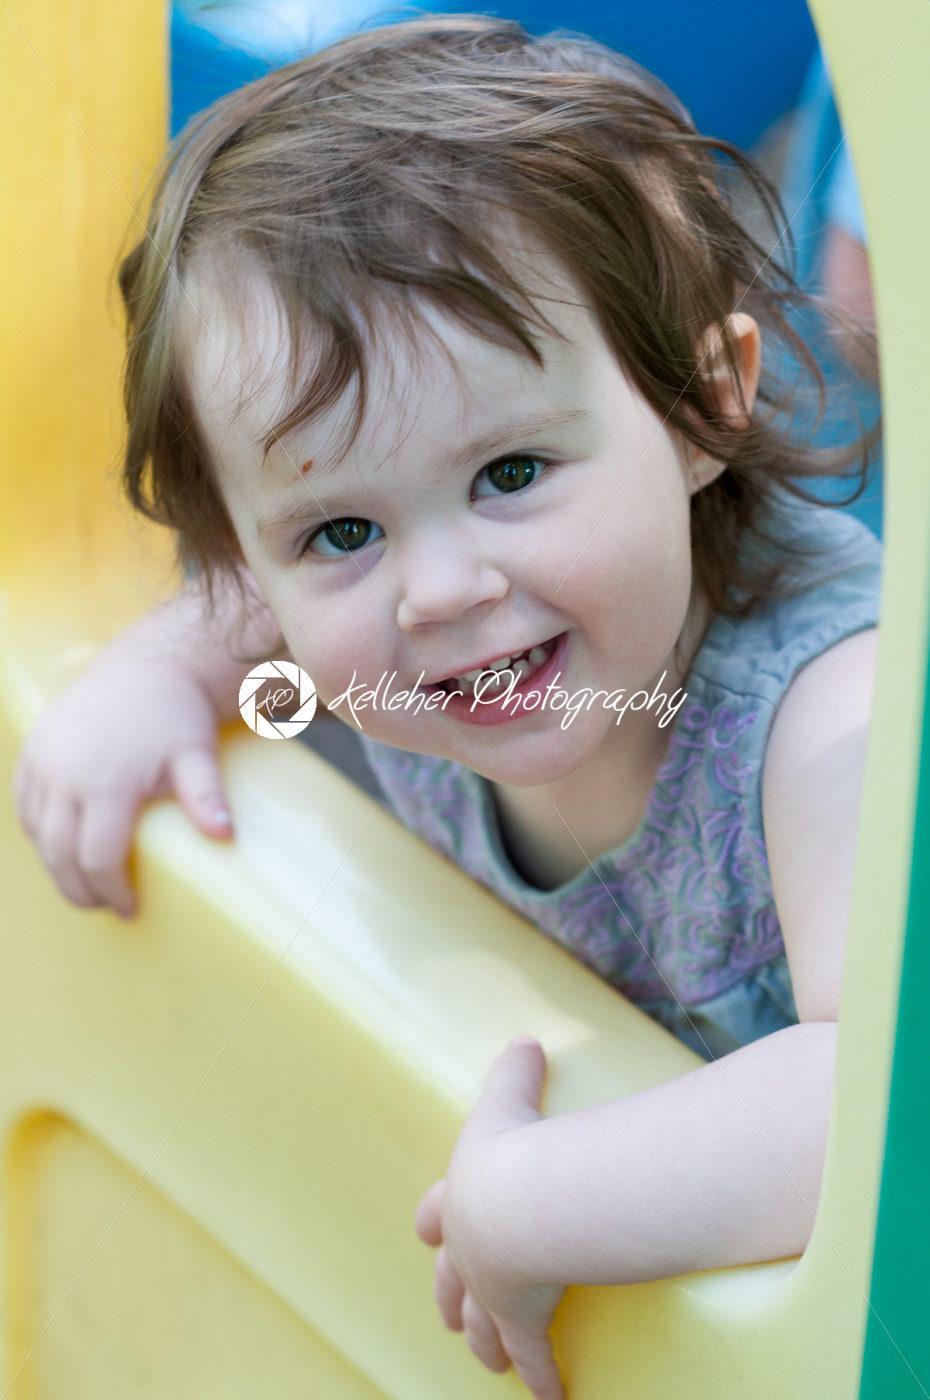 Little girl wearing summer dress looking out from plastic play house window in a playground - Kelleher Photography Store